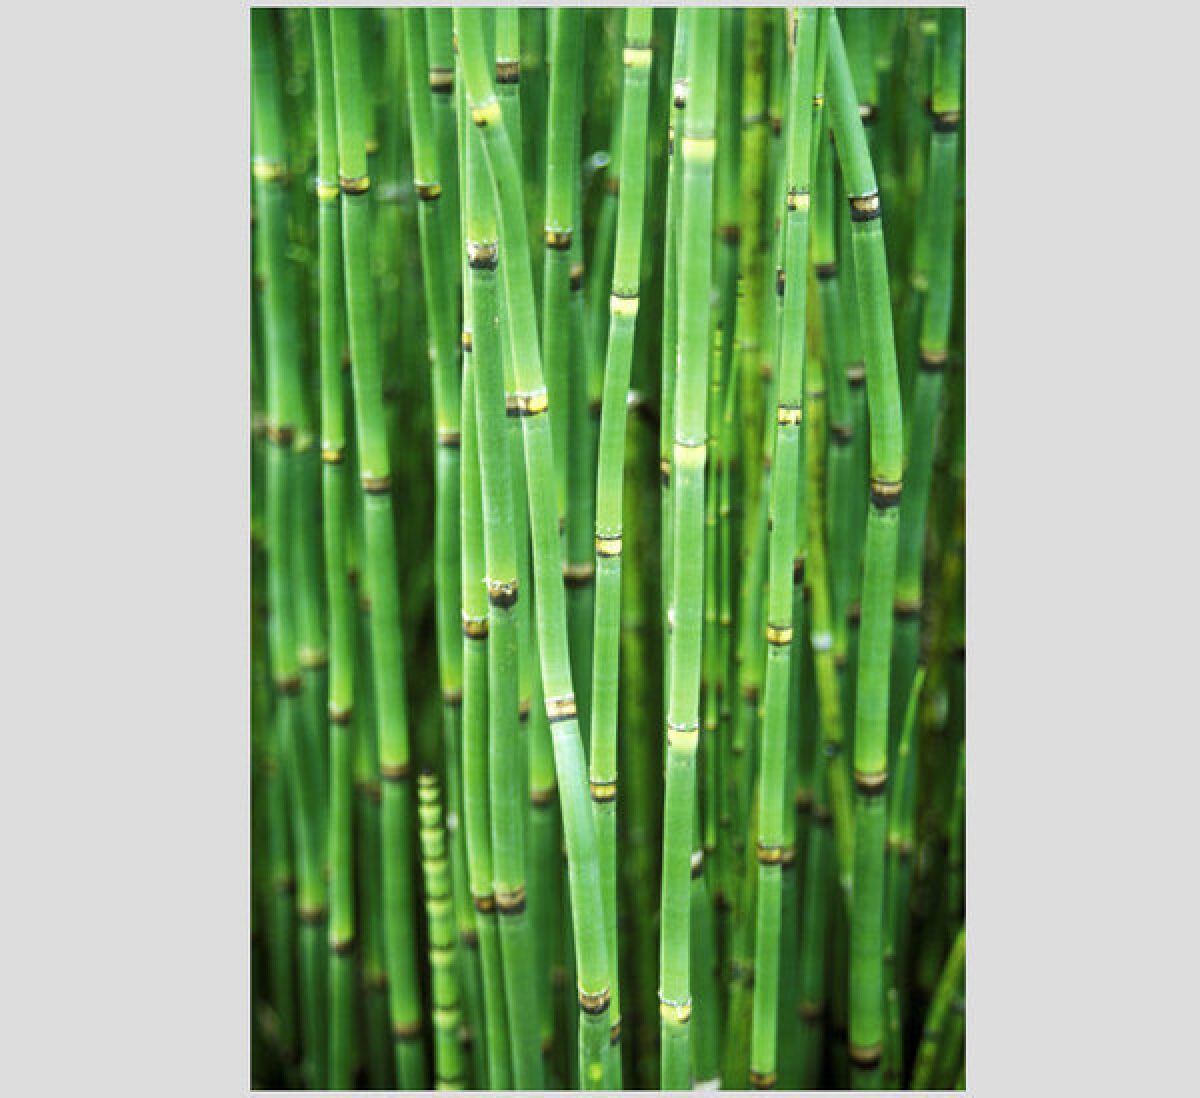 Horsetail reed survives best in rich, peat moss-based potting soil mix.